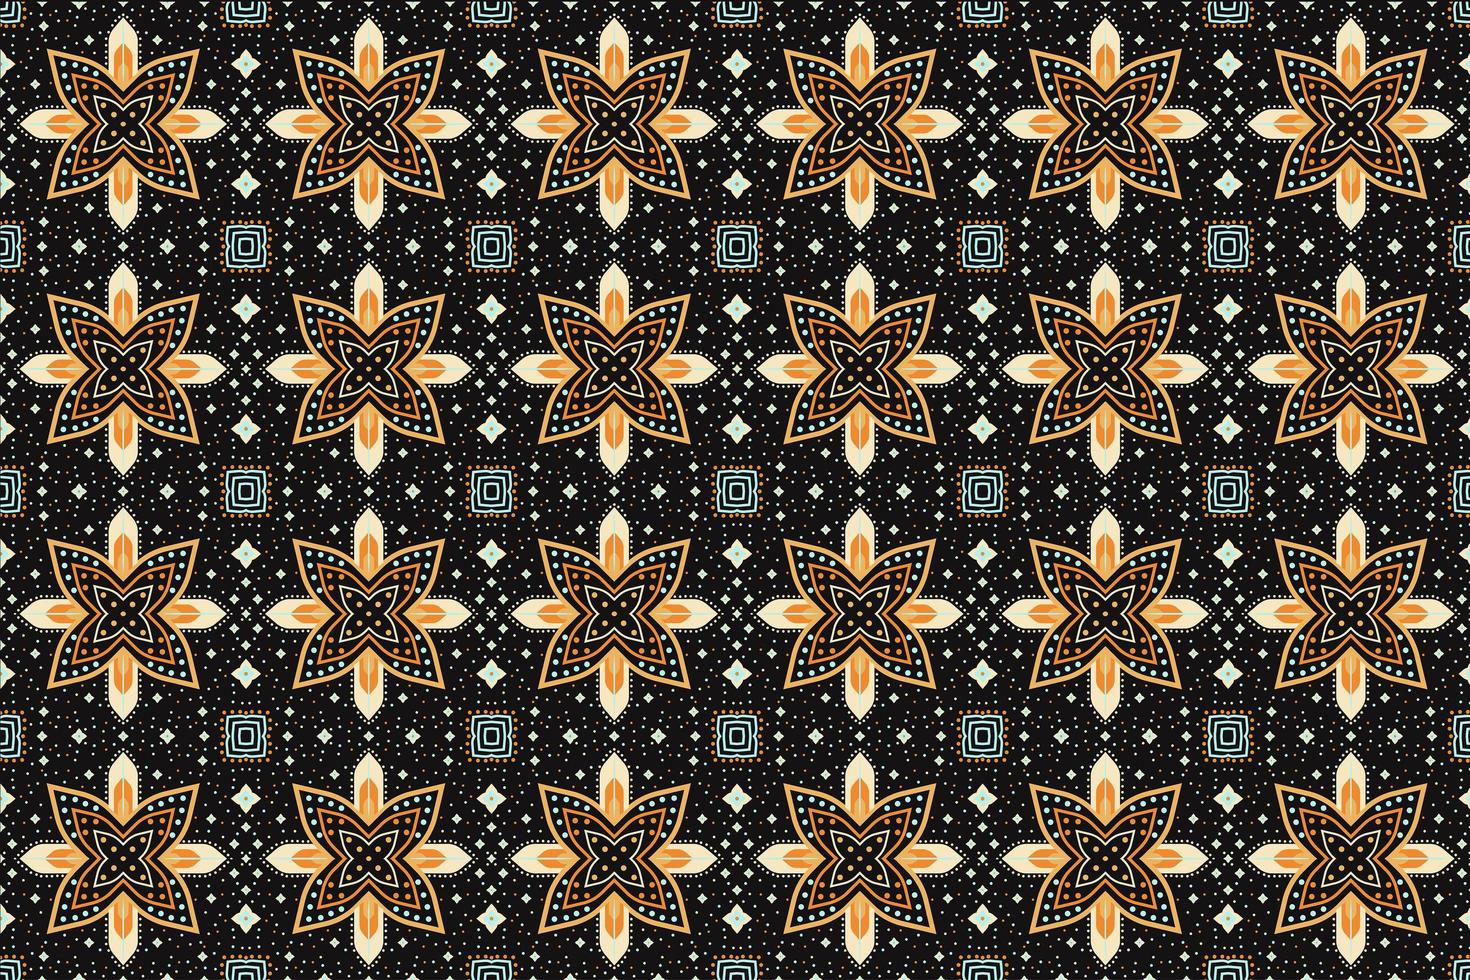 Geometric ethnic pattern oriental. seamless pattern. Design for fabric, curtain, background, carpet, wallpaper, clothing, wrapping, Batik, fabric,Vector illustration. pattern sty vector